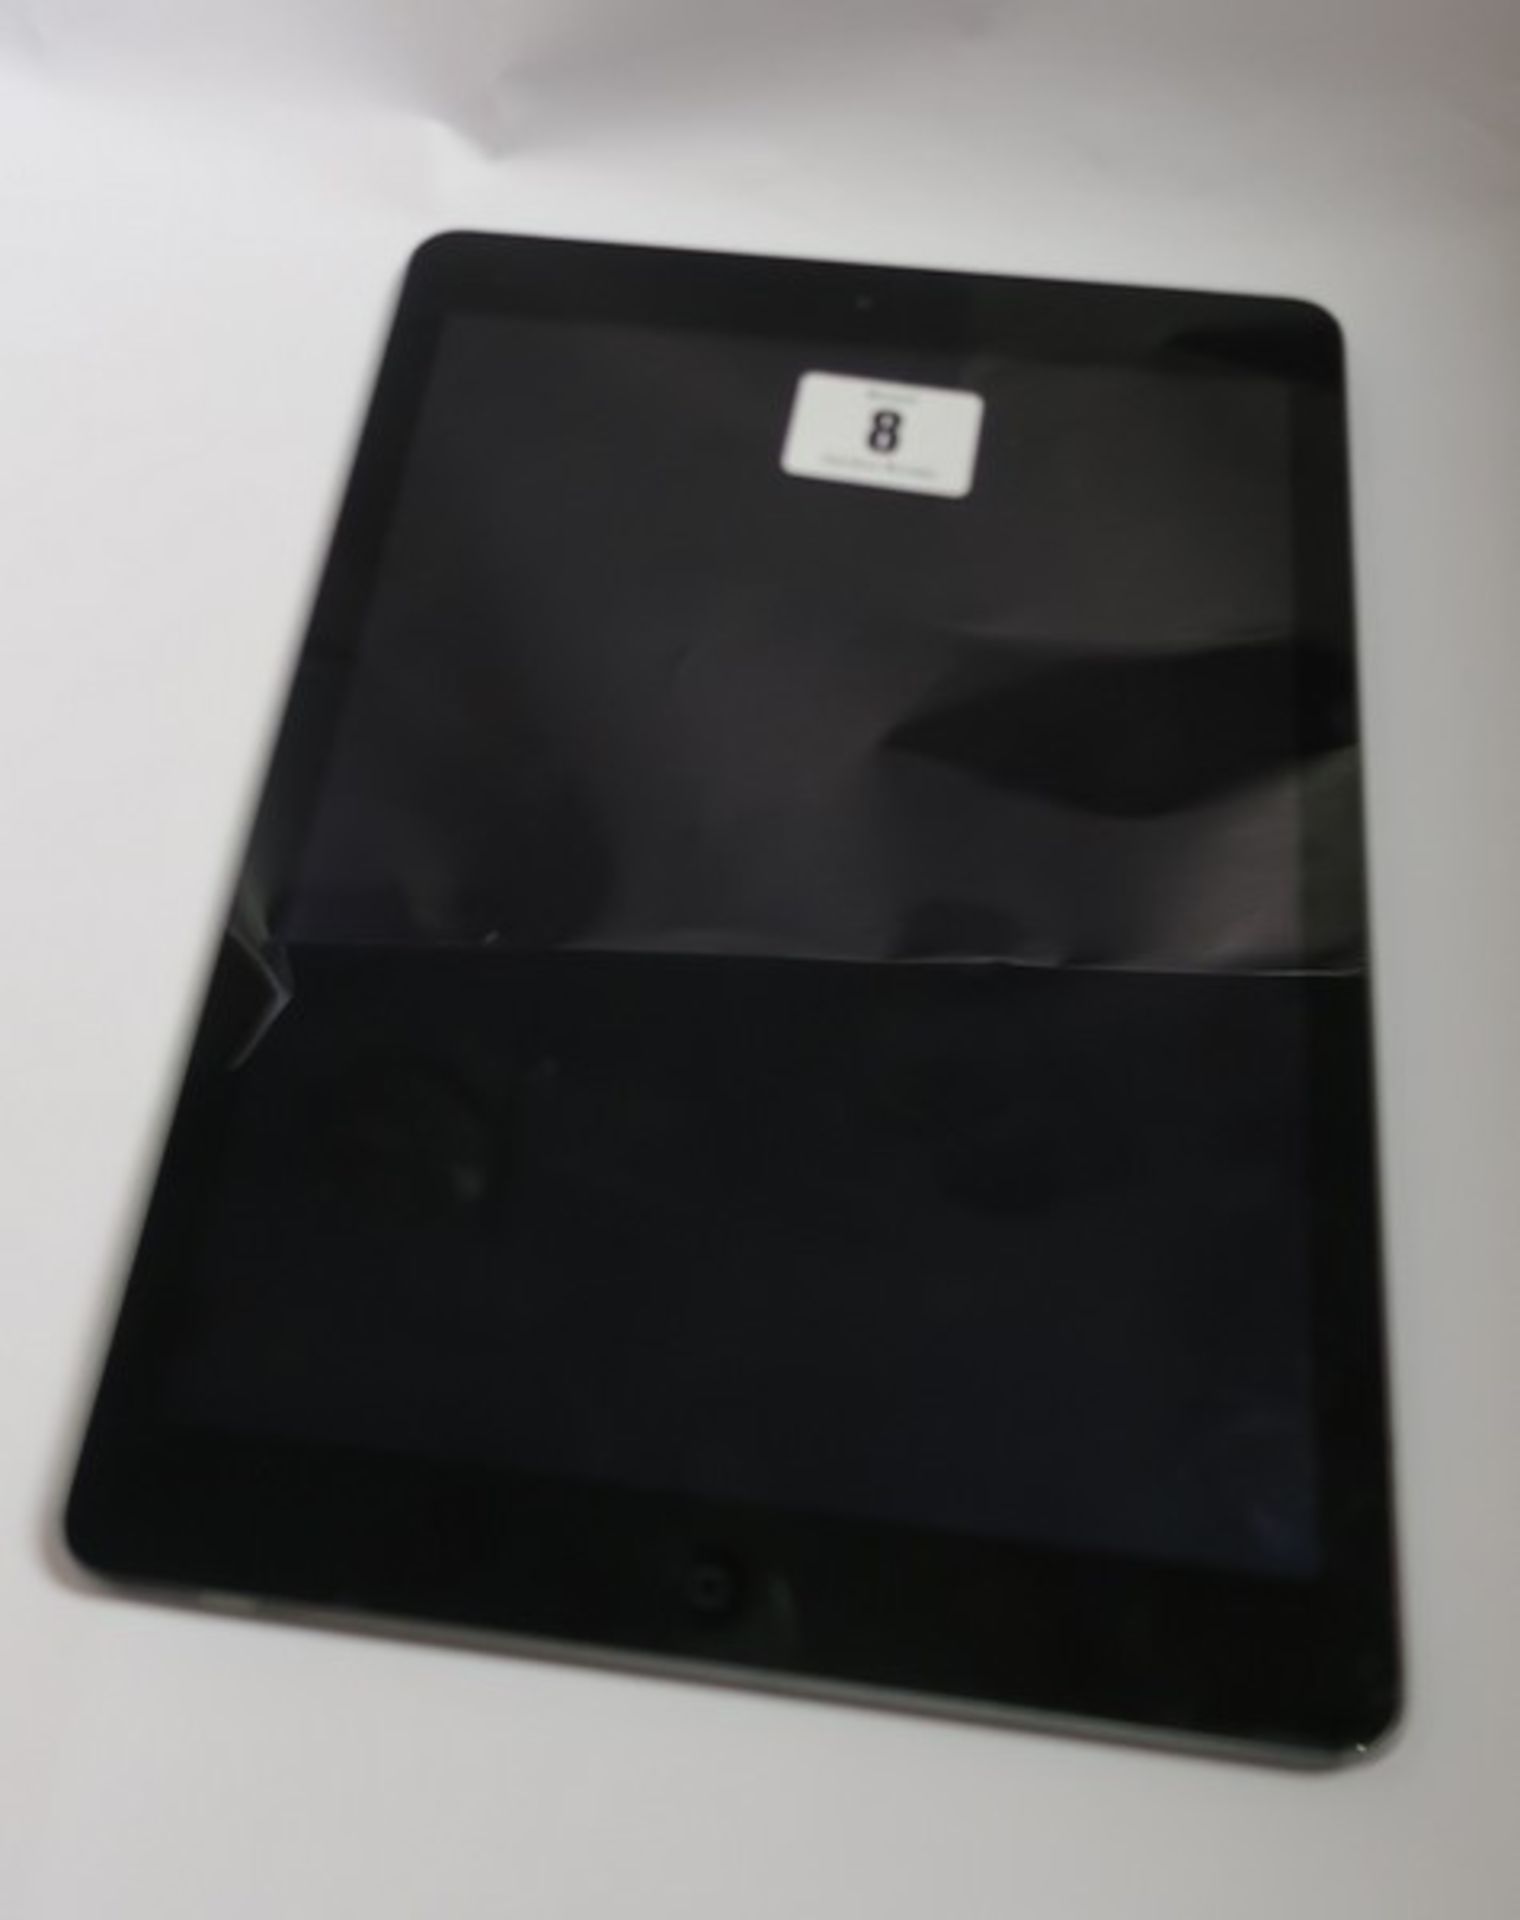 An Apple iPad Air (Wi-Fi/Cellular) A1475 64GB in Space Grey (IMEI: 35884505033681) (Activation